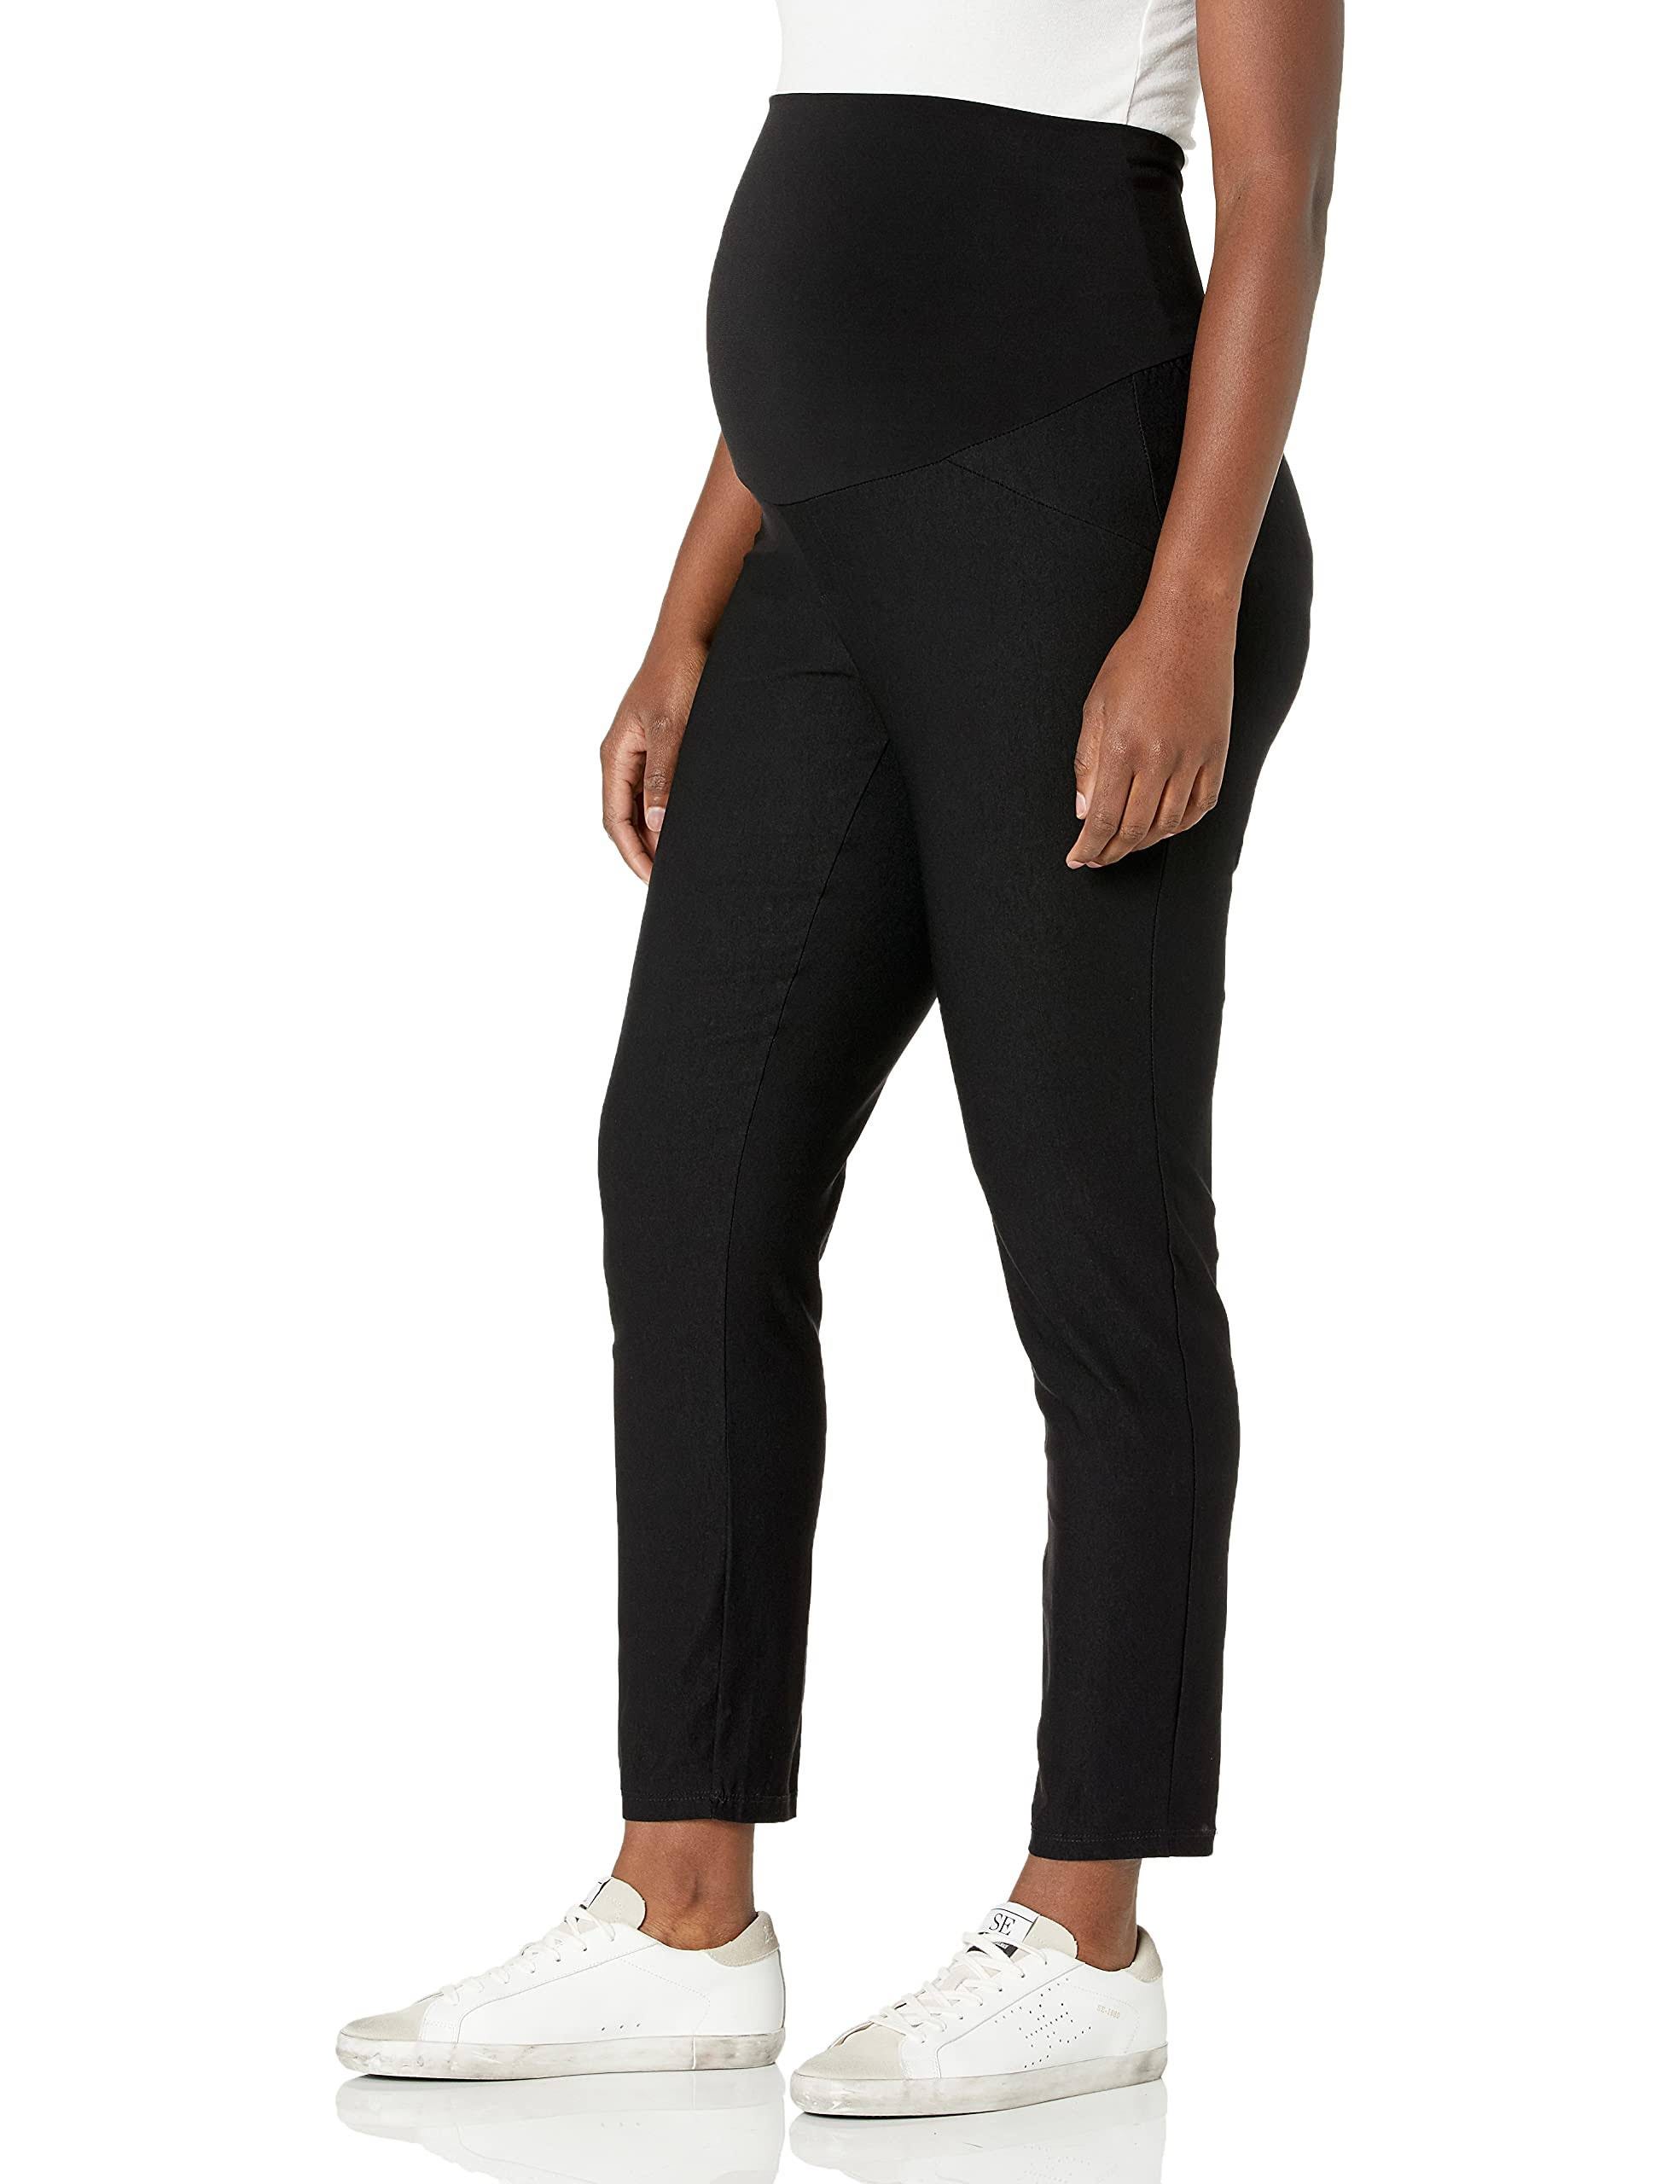 Comfortable Maternity Pants: Bi-stretch and Slim Fit | Image